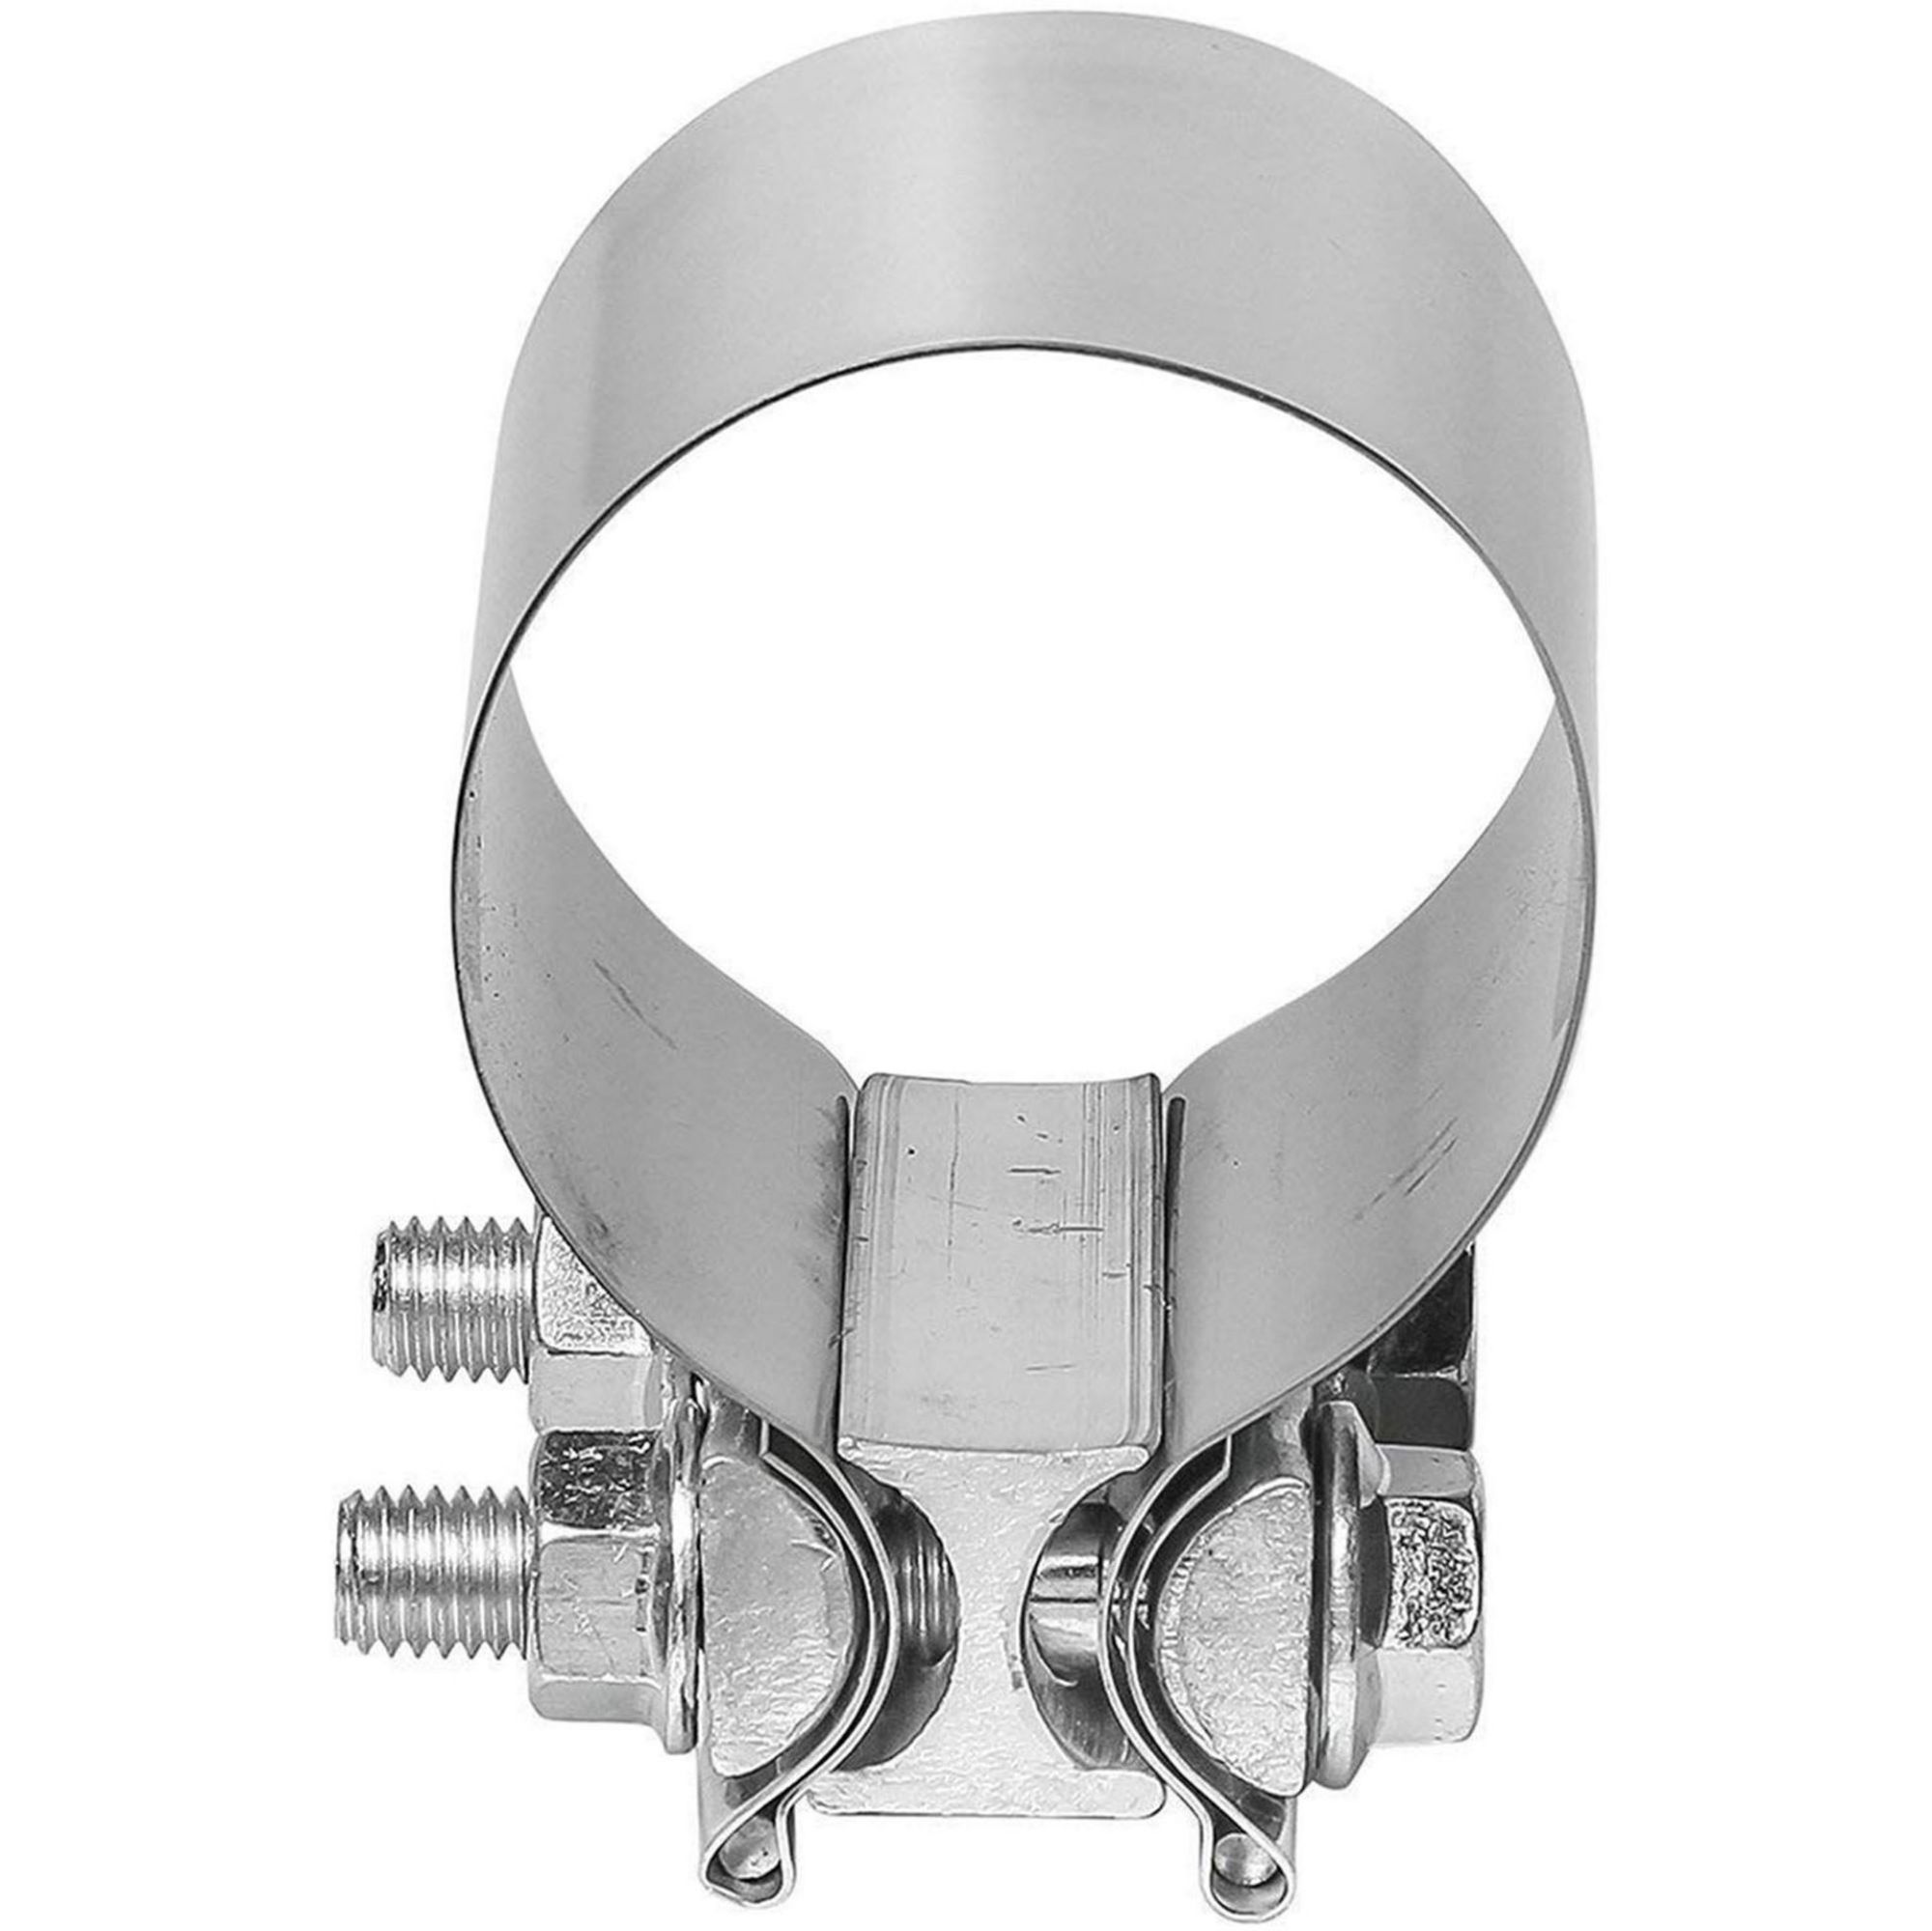 2" inch exhaust clamp | muffler clamp | exhaust band clamp | exhaust